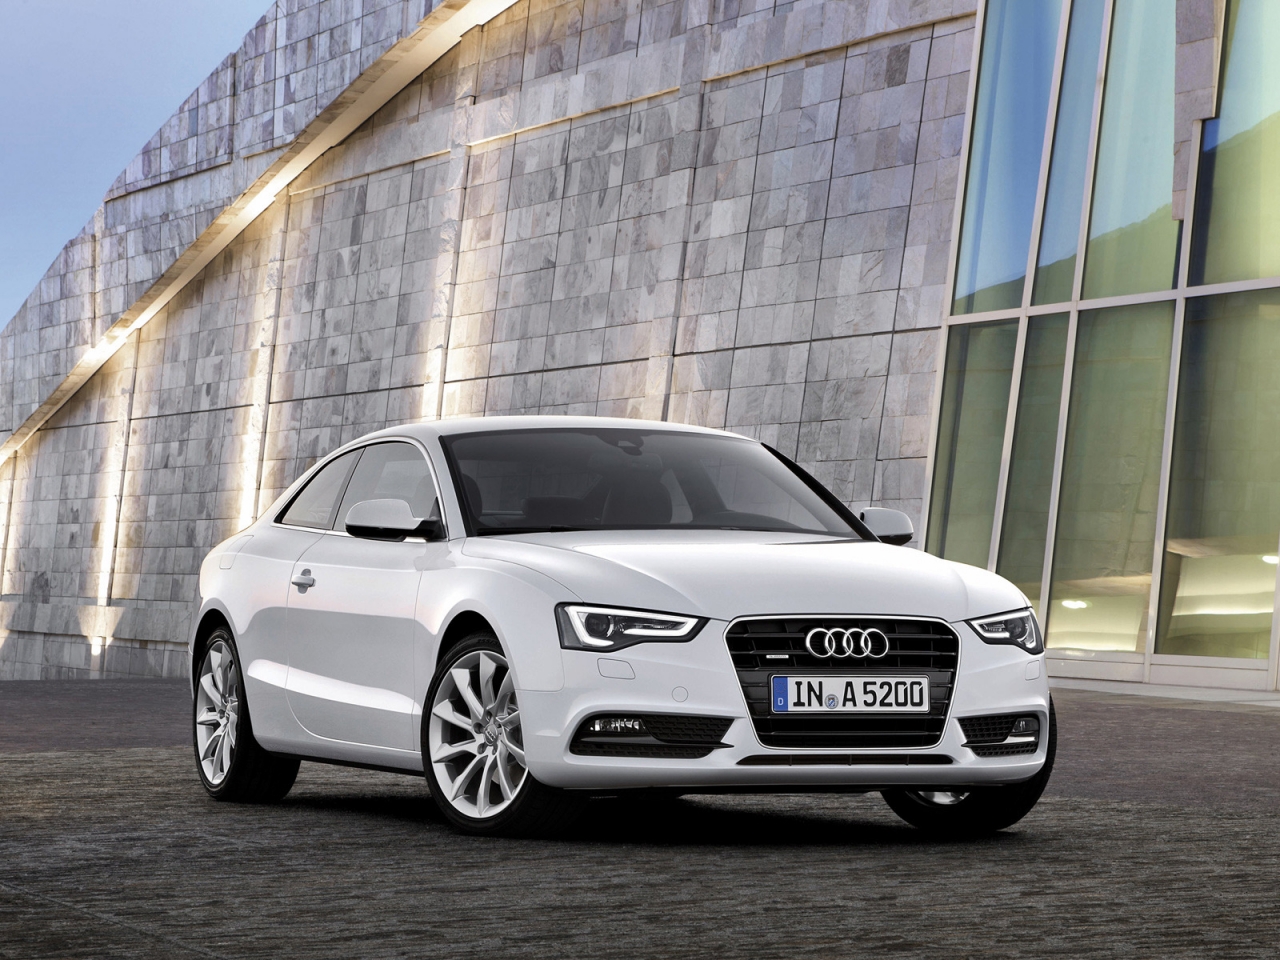 2012 Audi A5 Coupe for 1280 x 960 resolution